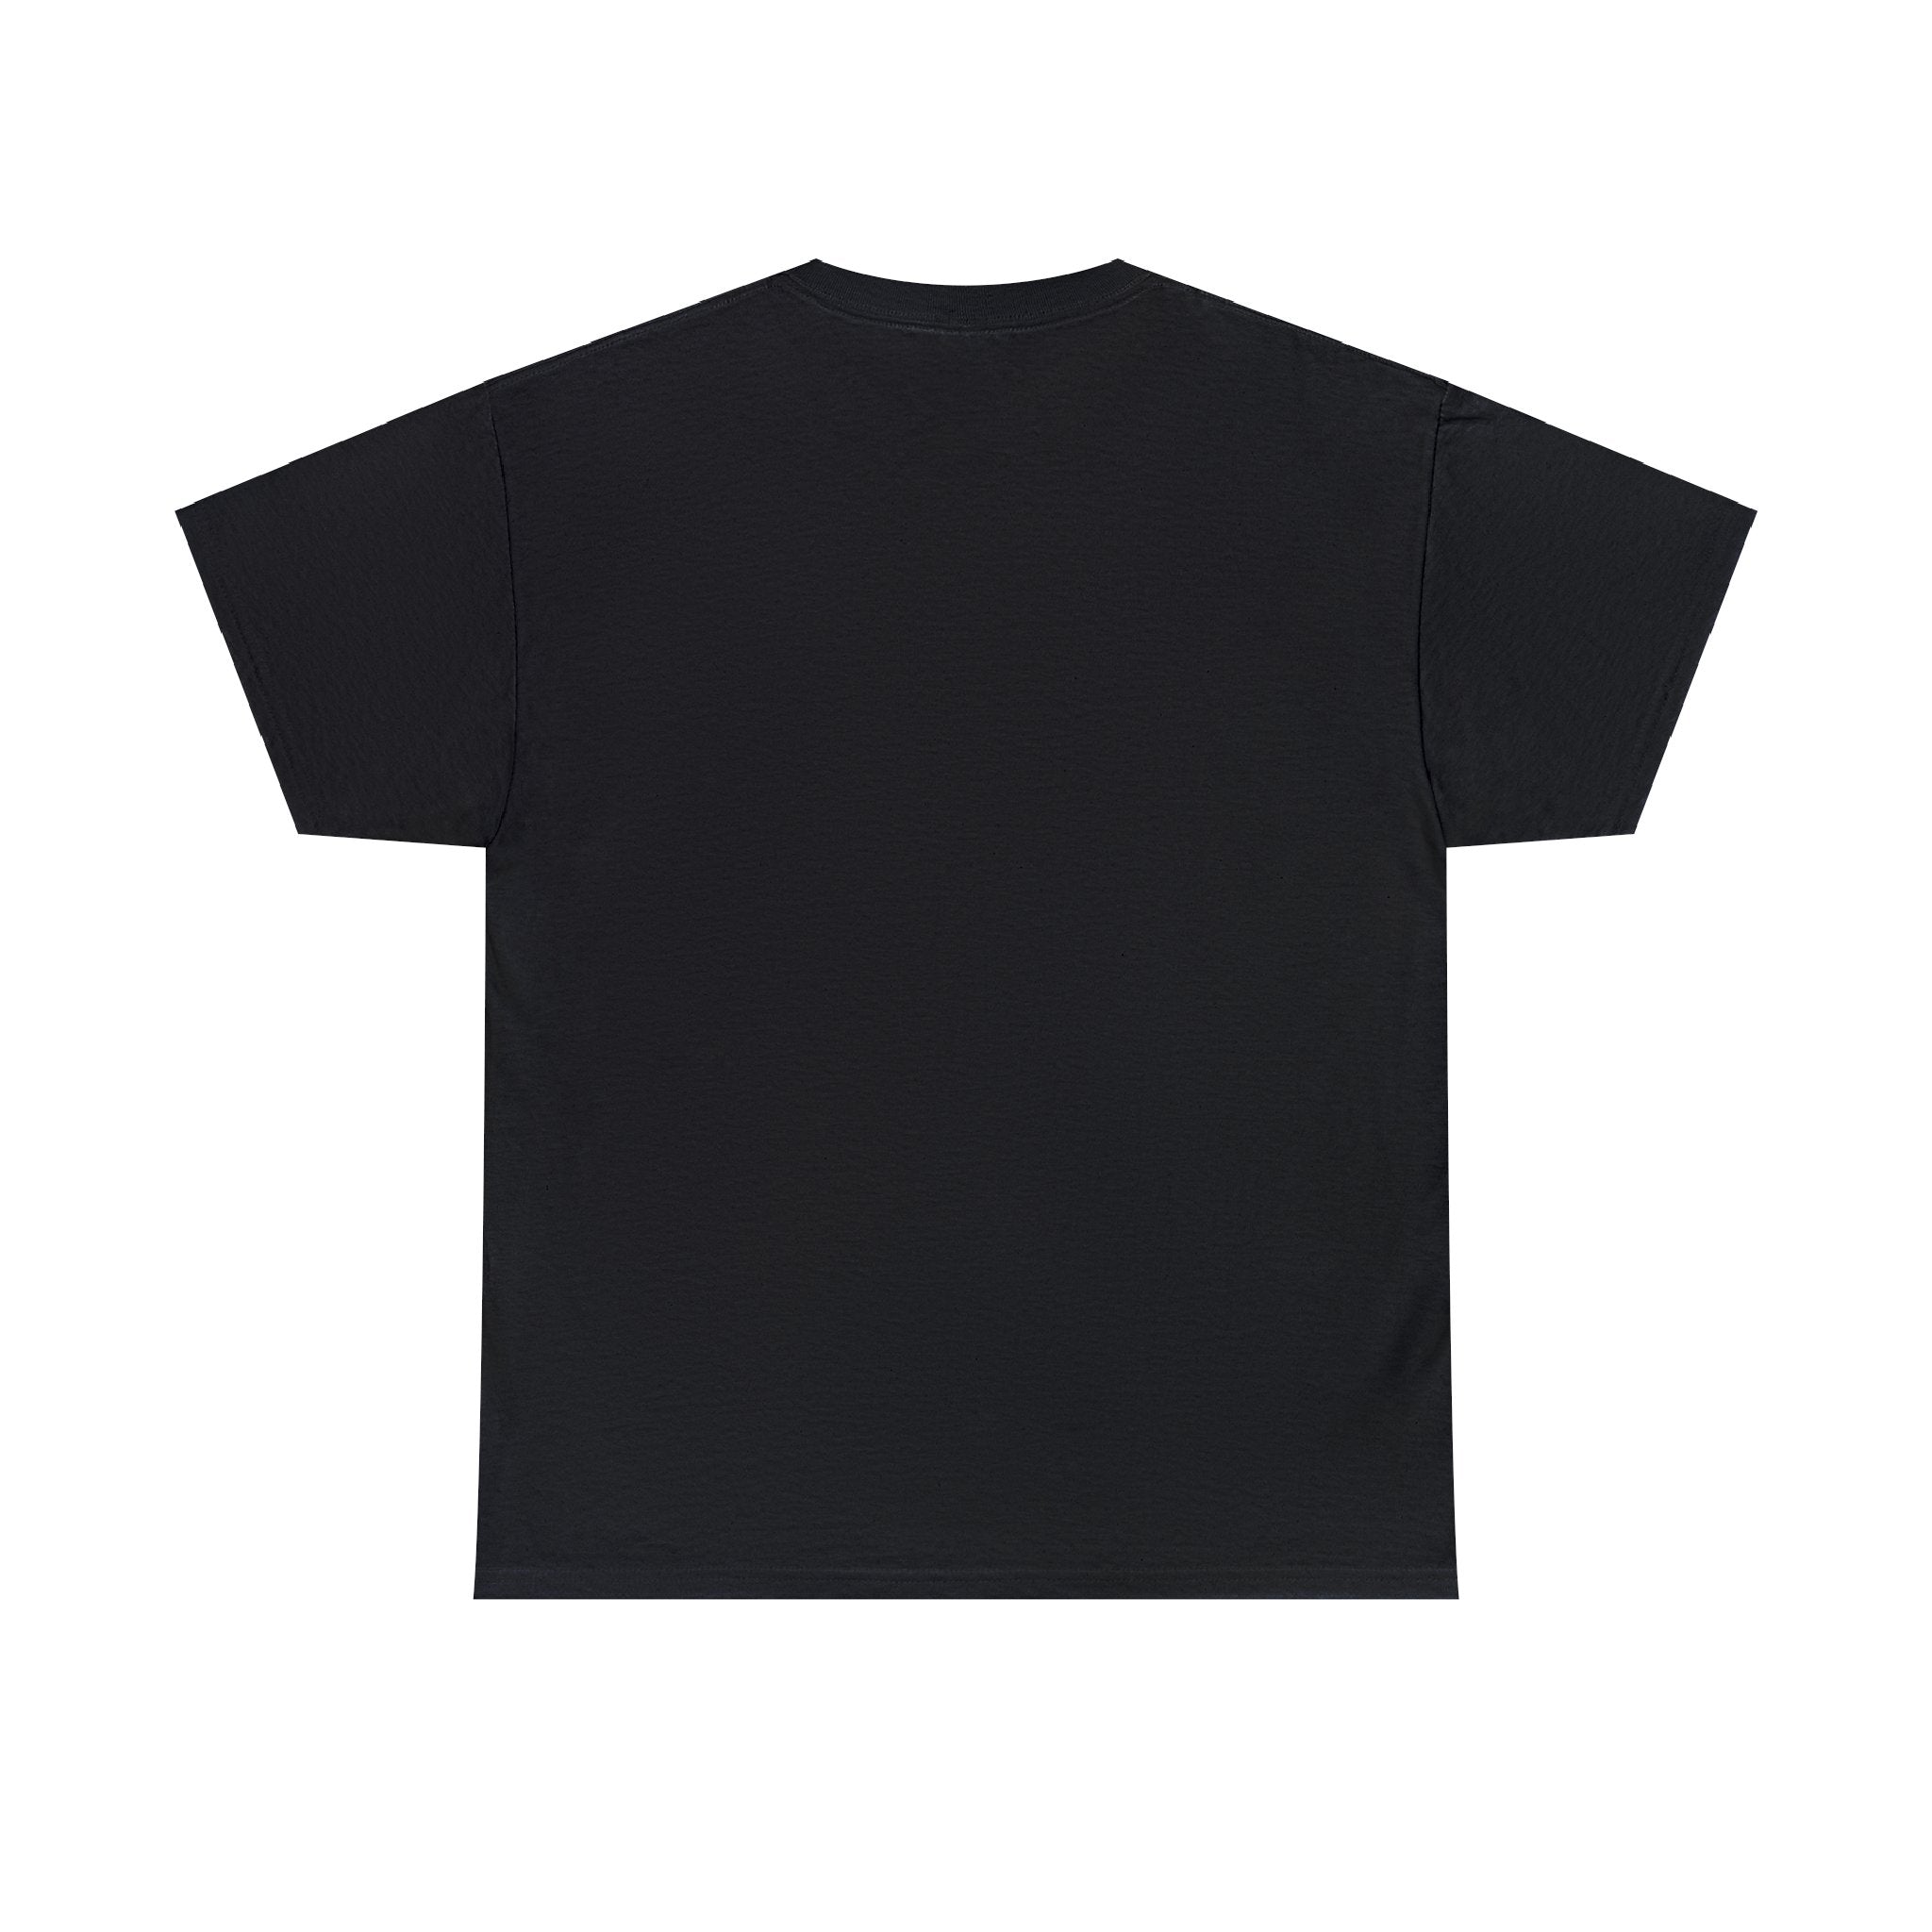 Grit PPYQ® Defined Tee